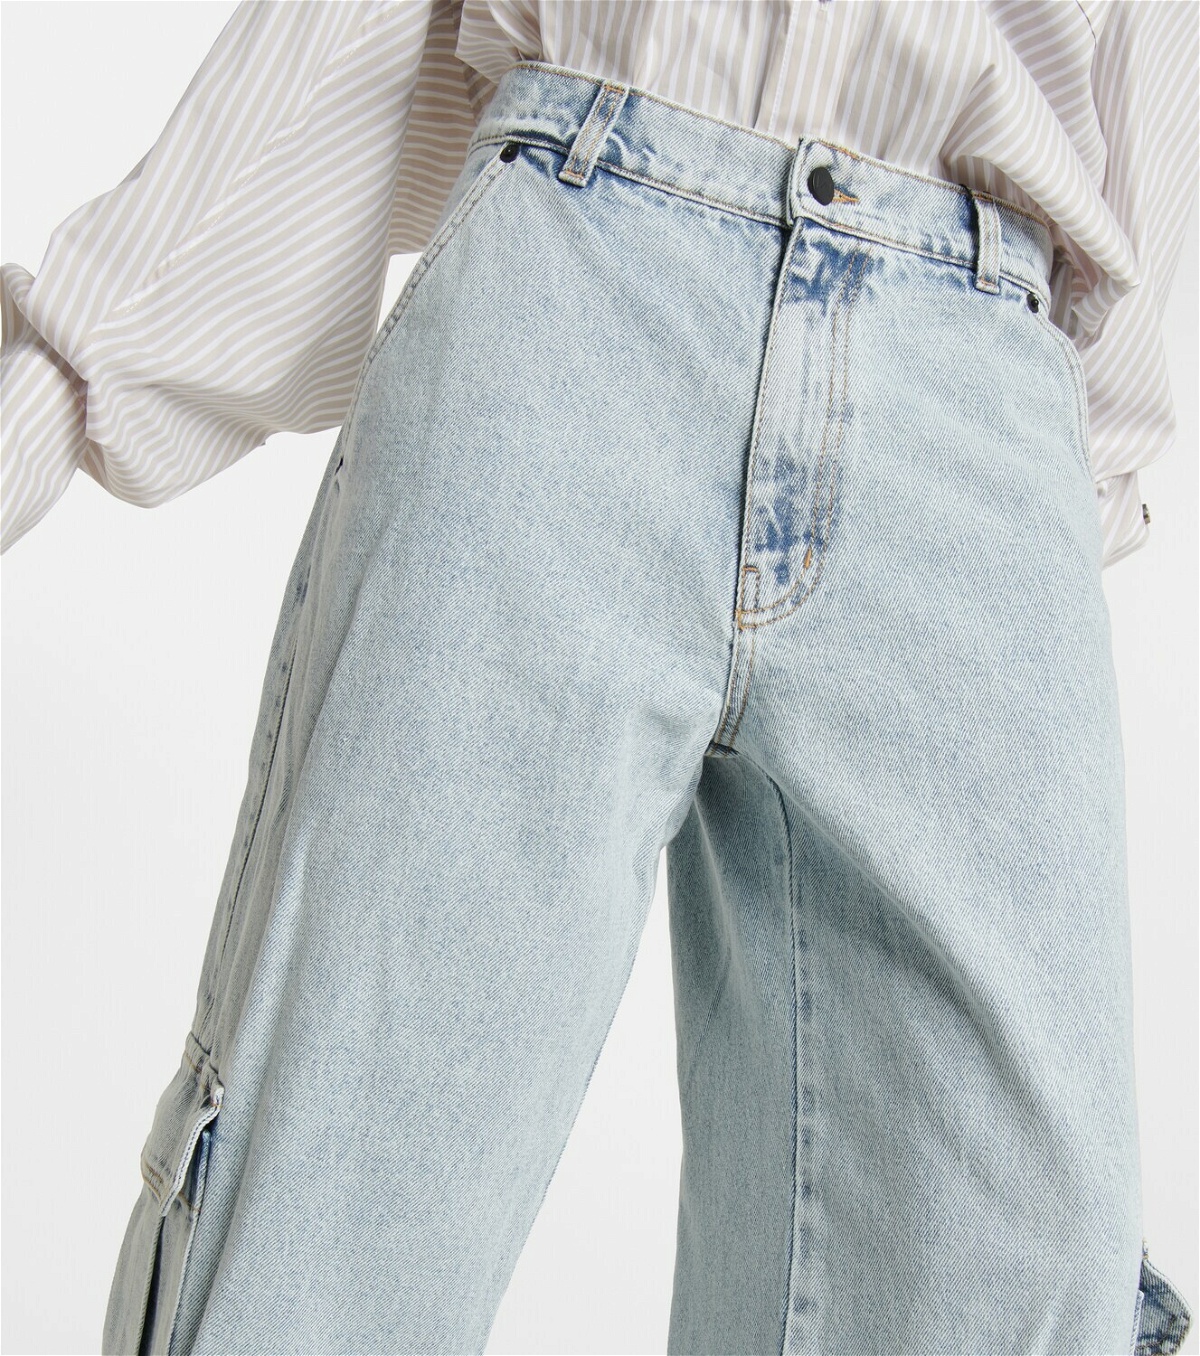 The Mannei Sado low-rise jeans